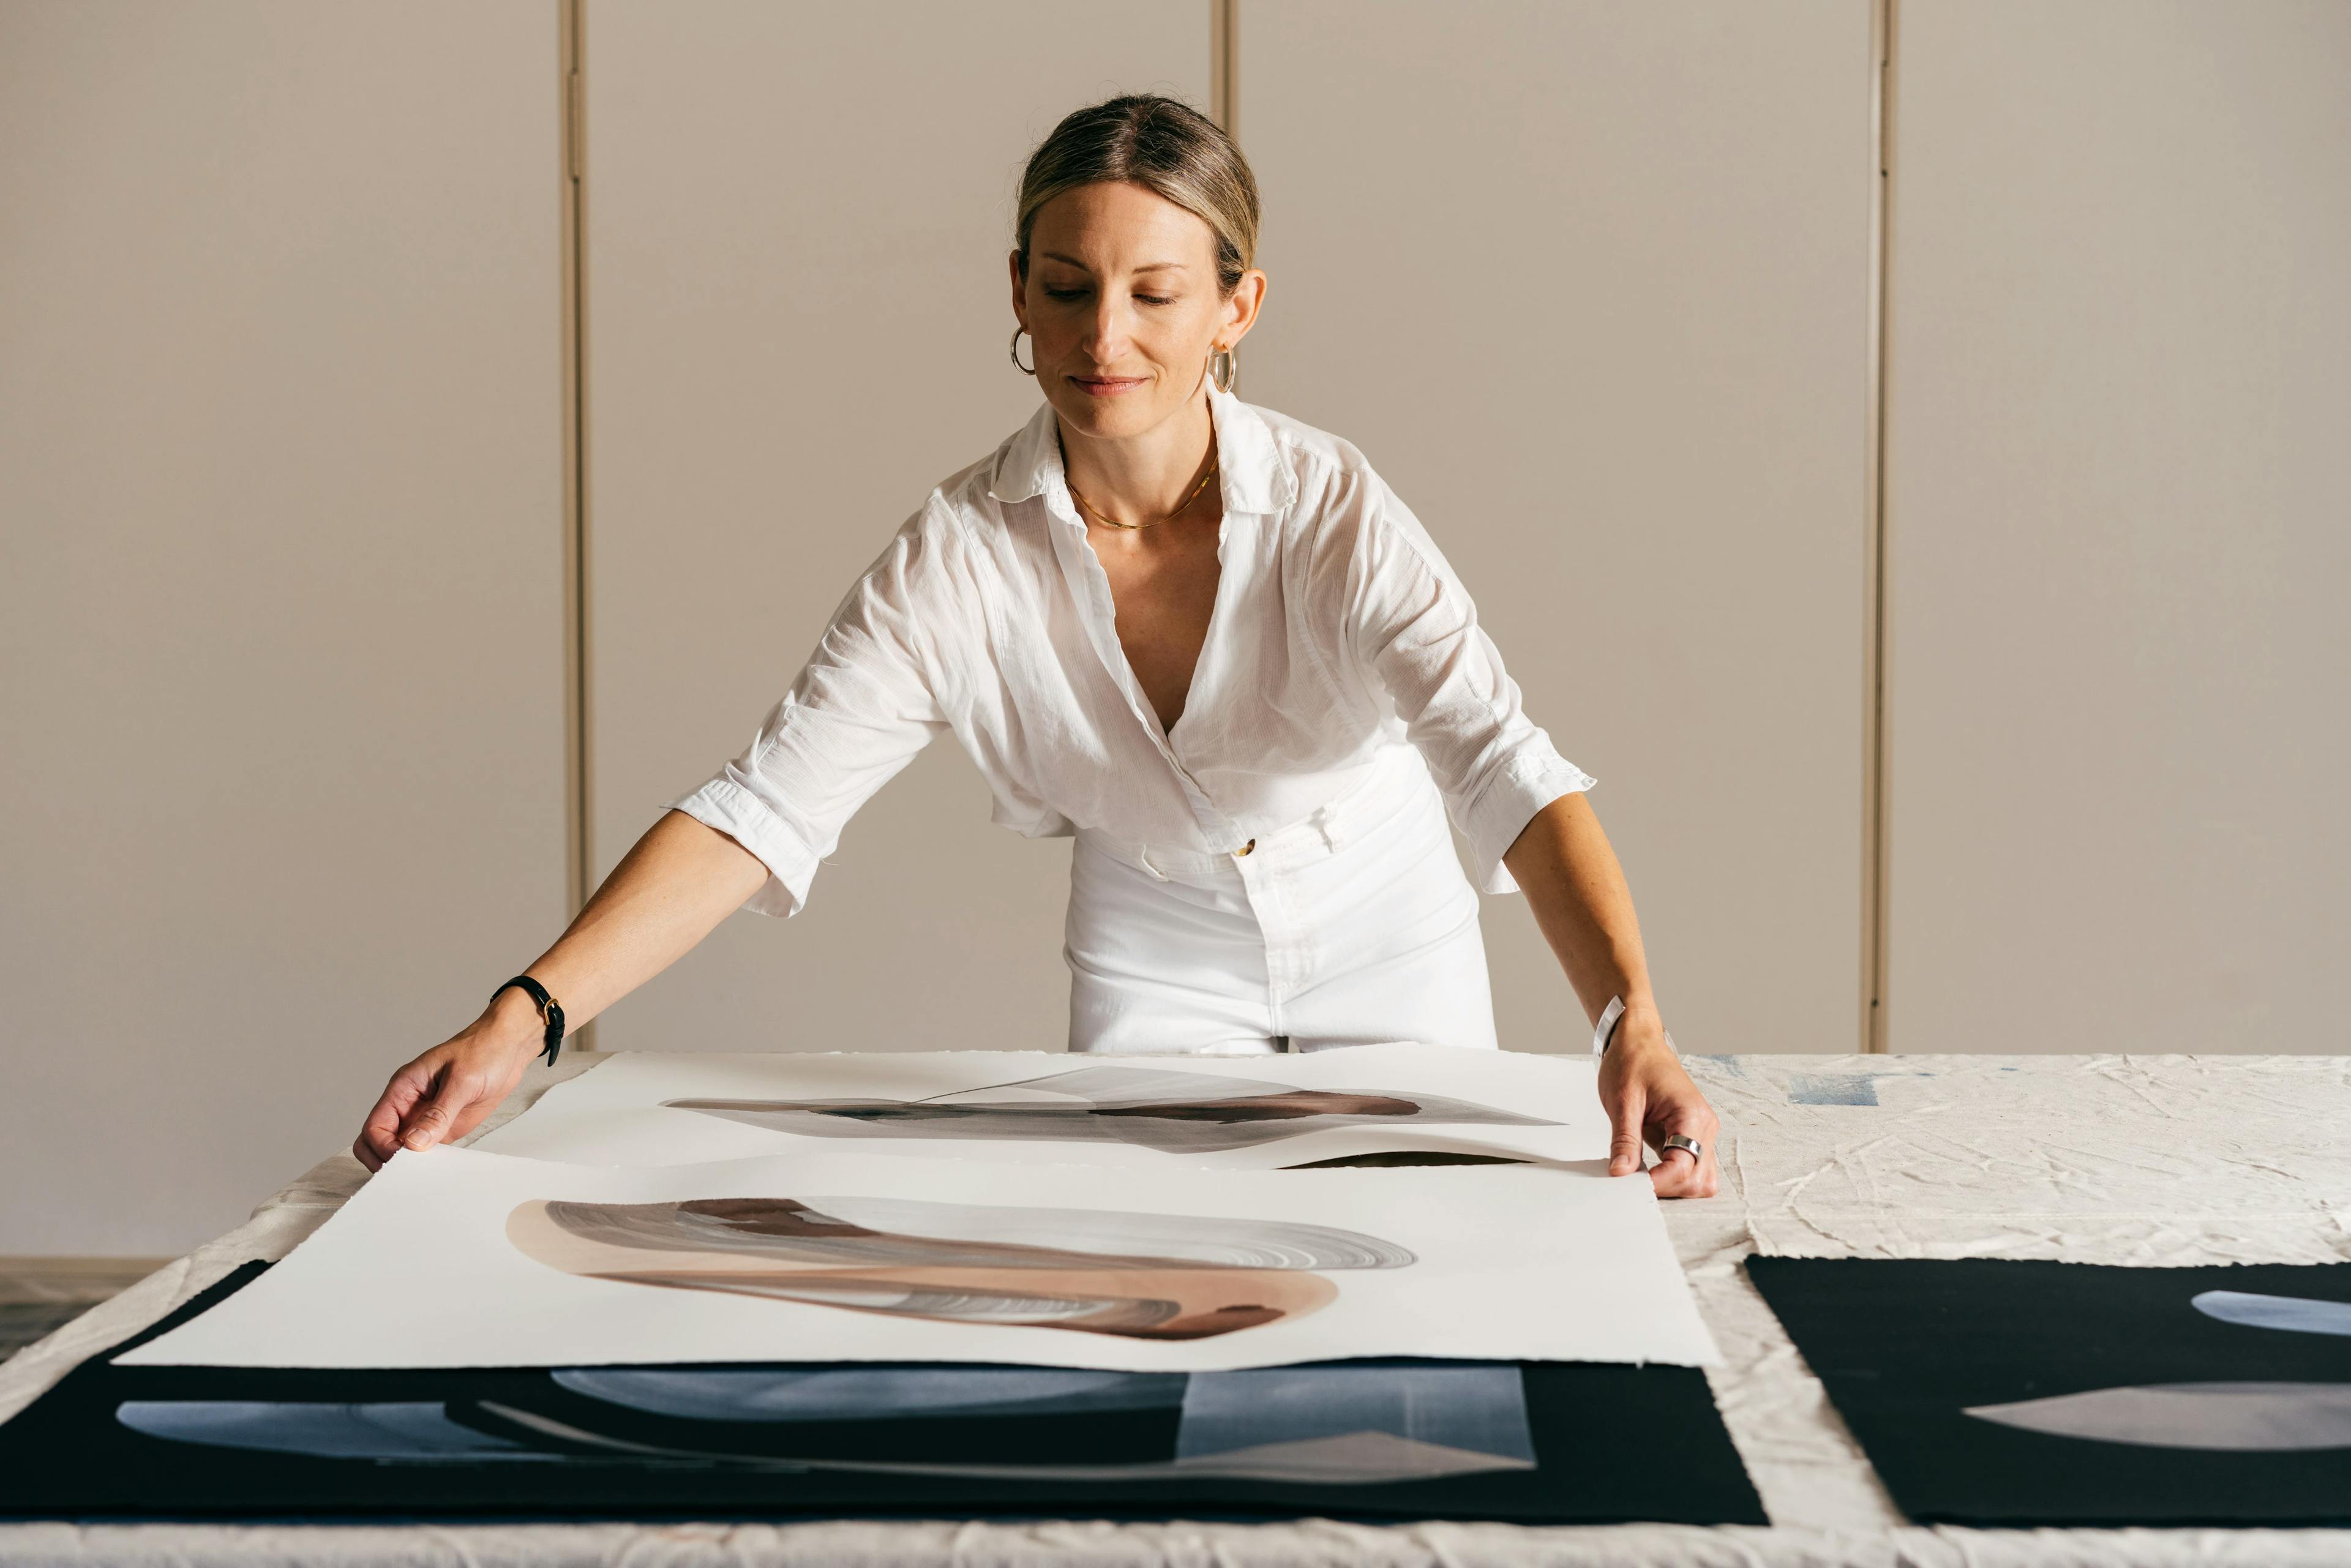 Artist Laura Naples moves large paintings on paper across a table at MacArthur Place.